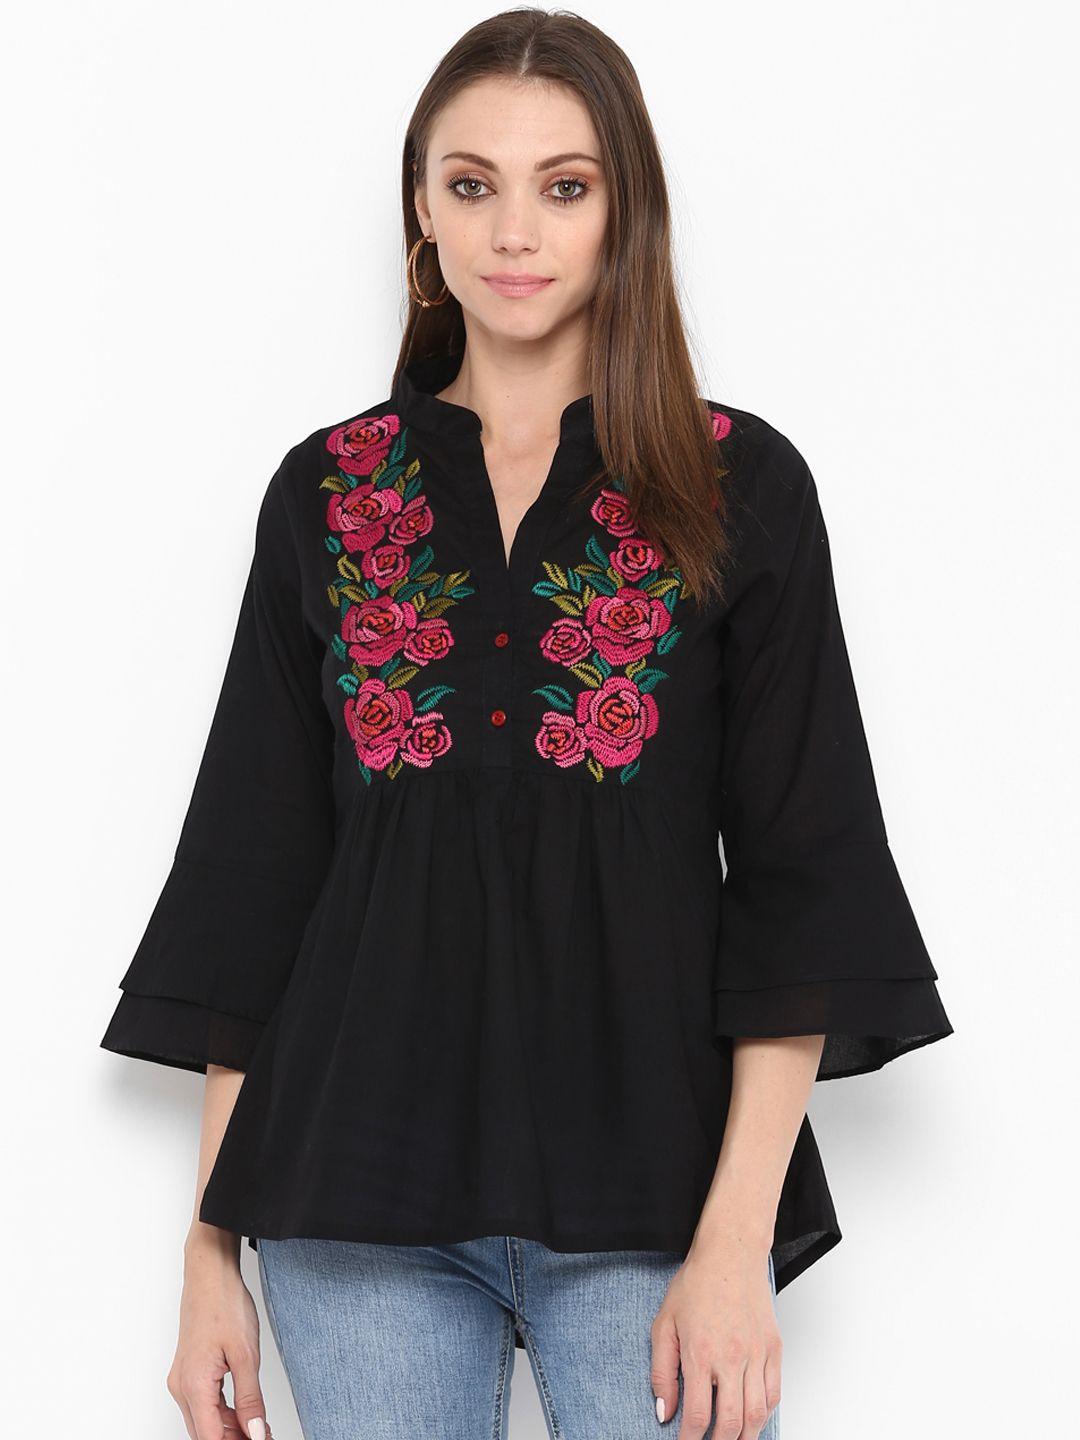 bhama-couture-women-black-floral-printed-pure-cotton-top